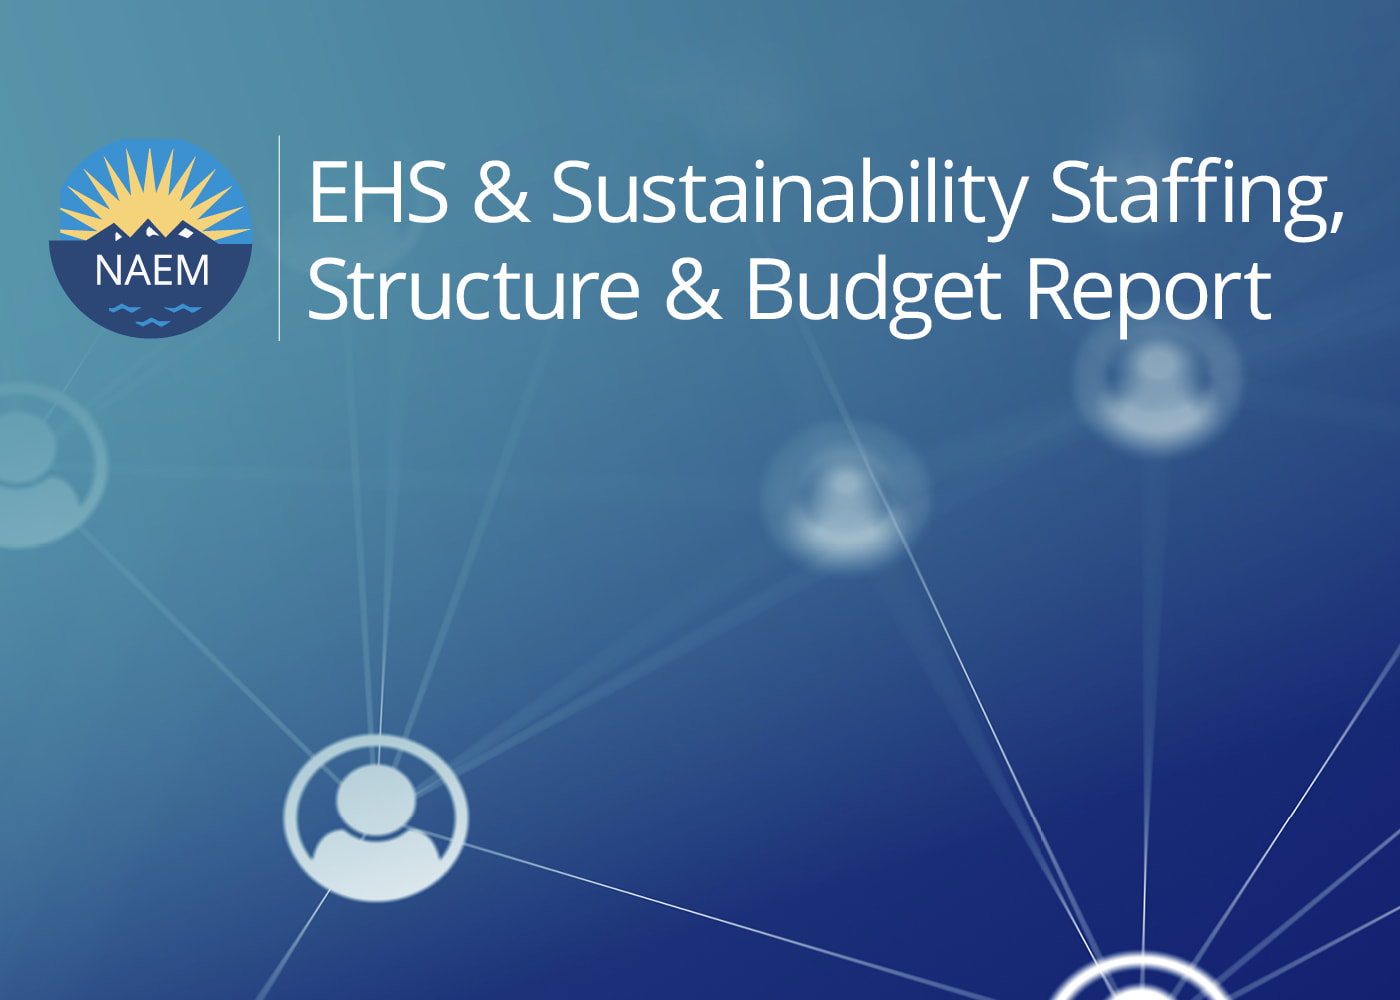 2020 EHS&S Staffing, Structure & Budgets Benchmark